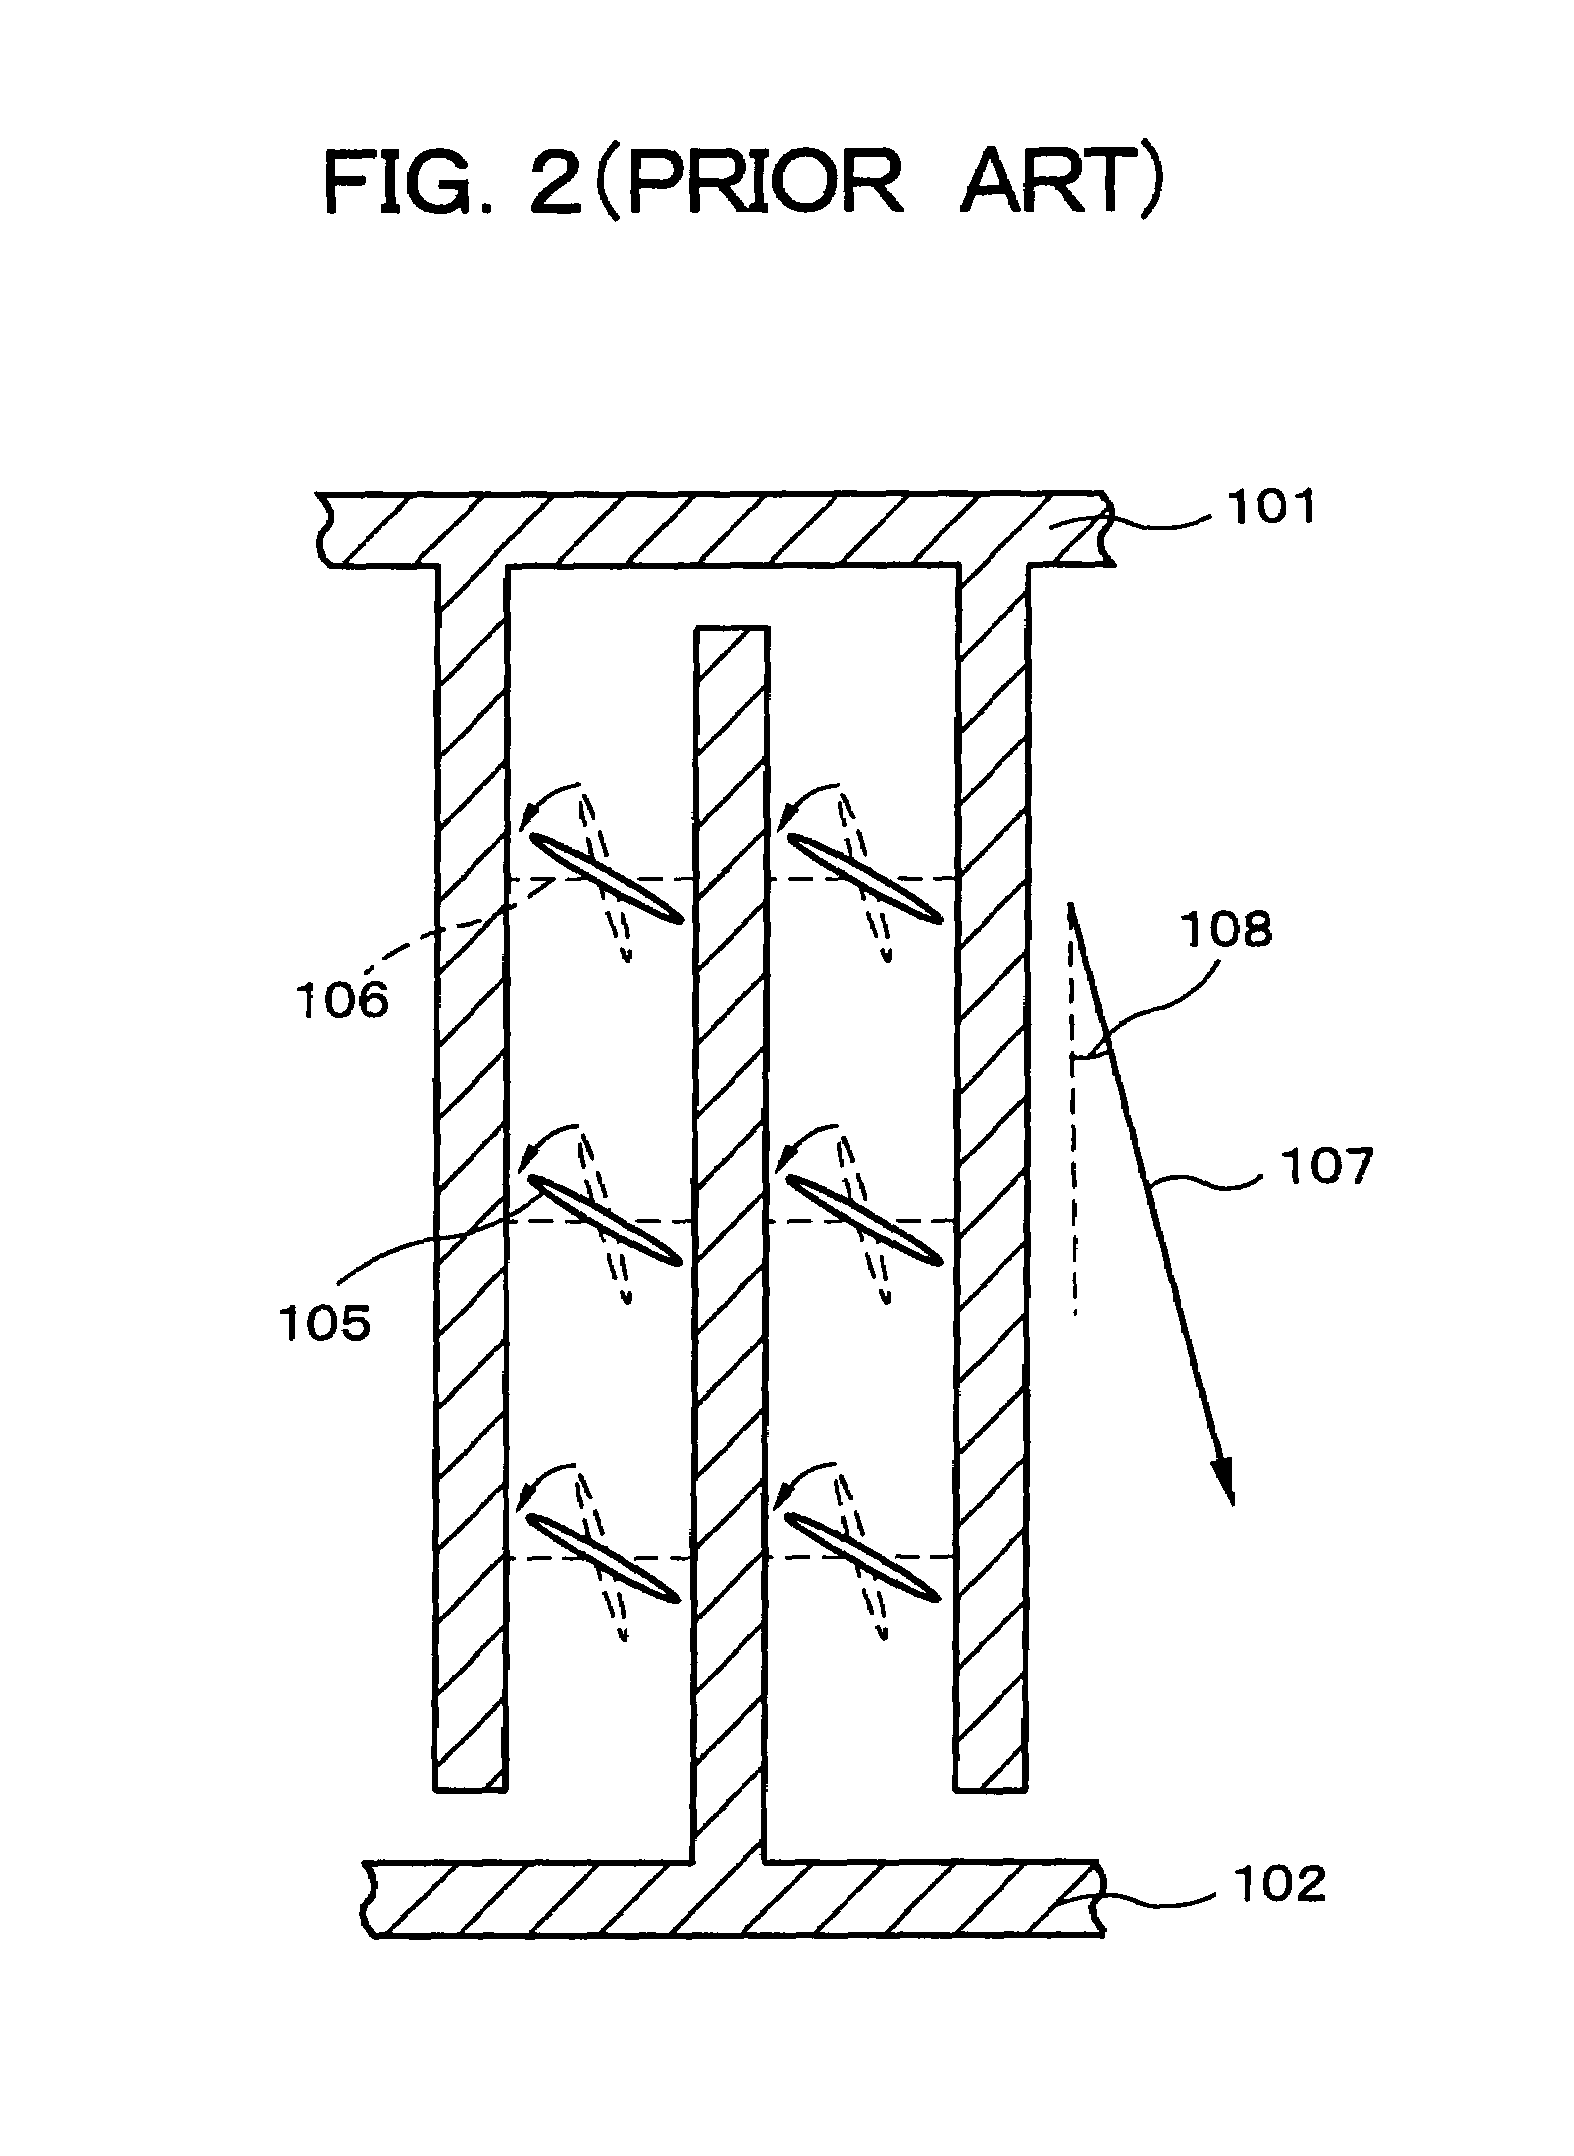 In-plane switching LCD apparatus having parallel uniform pixel and common electrode extensions having a principal portion and a specific portion